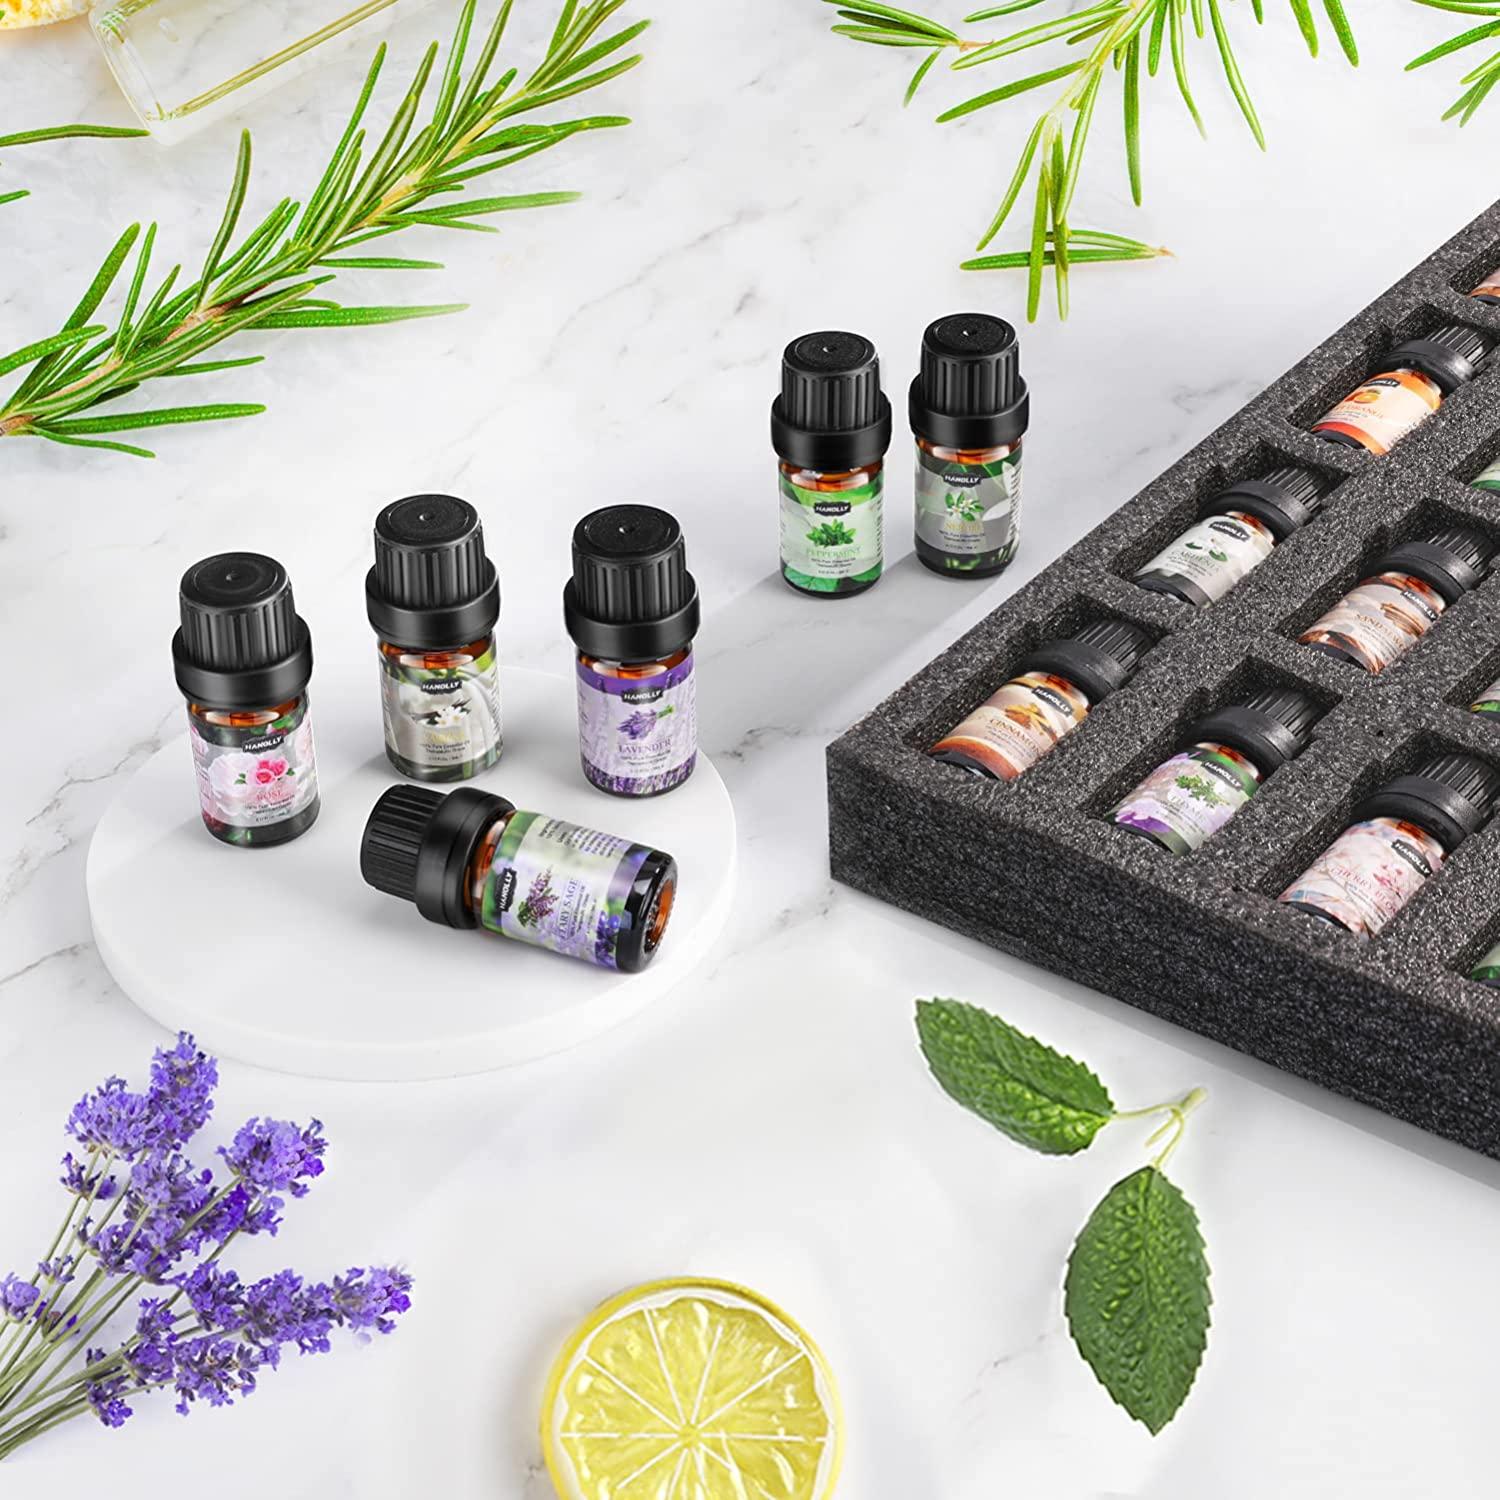  Mieztay Essential Oils Set - 40 Pcs Premium Essential Oil Kit  for Candle Making, Diffusers, Massages, Aromatherapy, Skin Care - Lavender,  Eucalyptus, Peppermint, Tea Tree, Sandalwood Aromatherapy Oils : Health &  Household